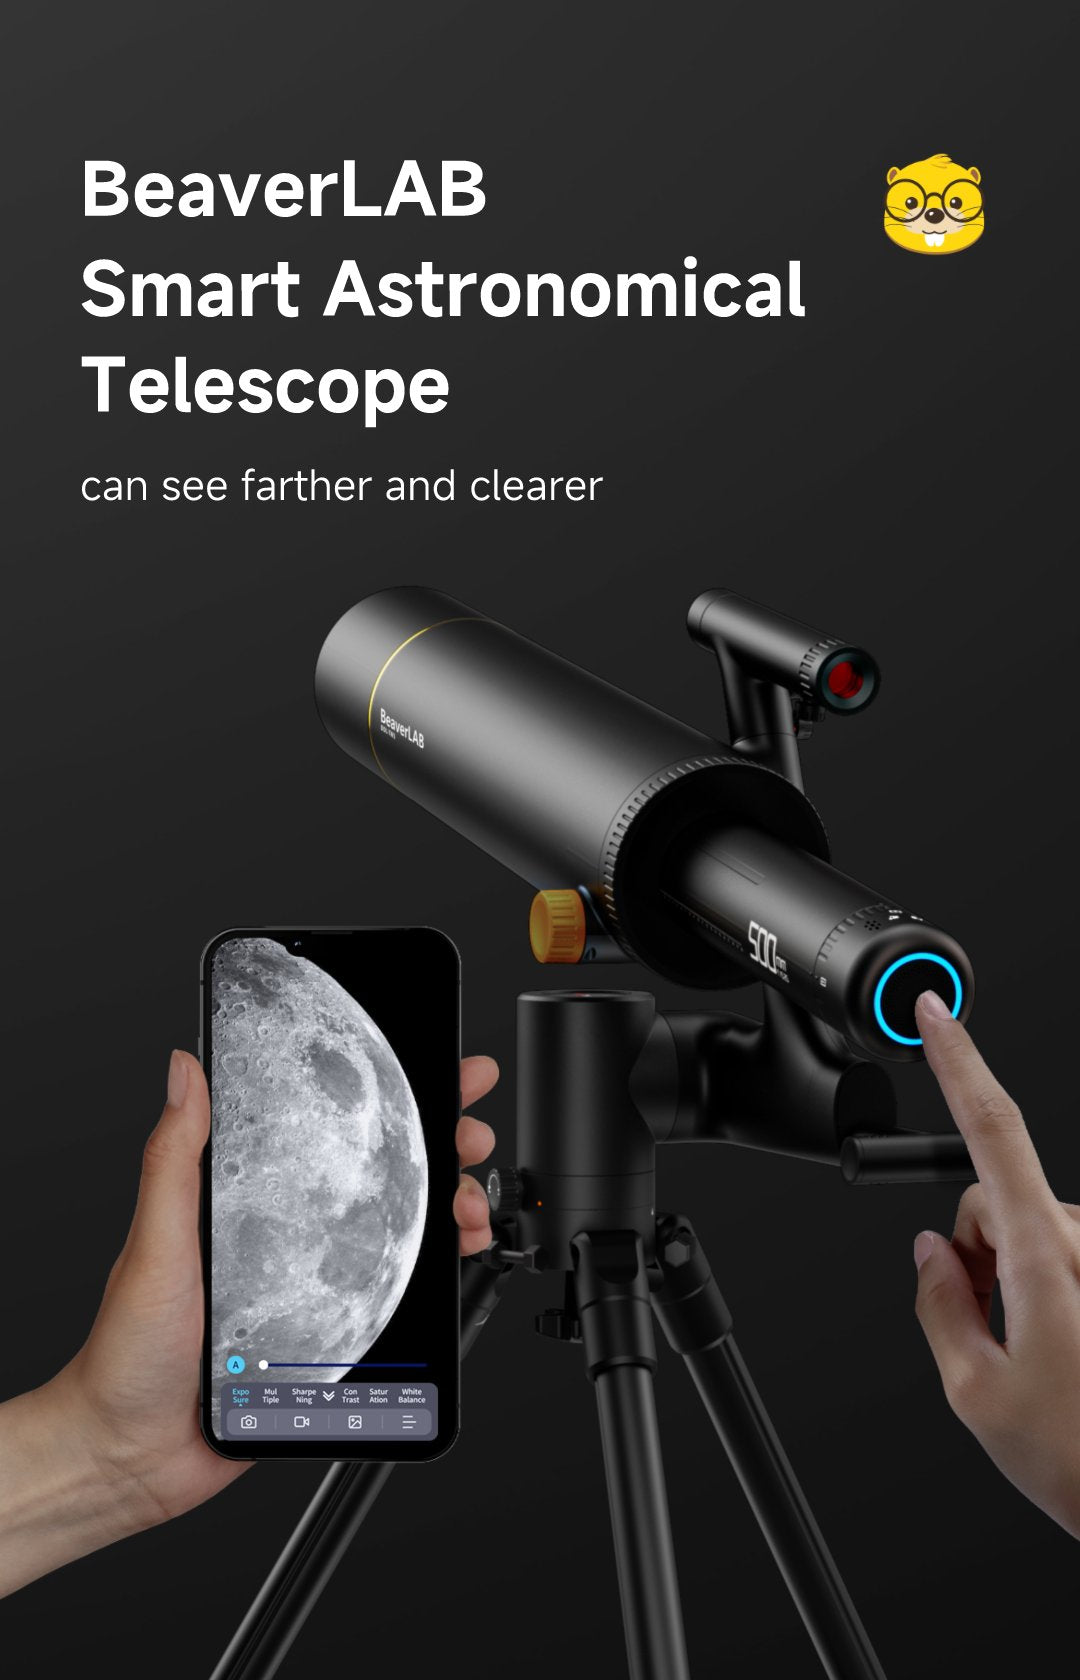 Beaverlab Smart Telescope for seeing farther and clearer12